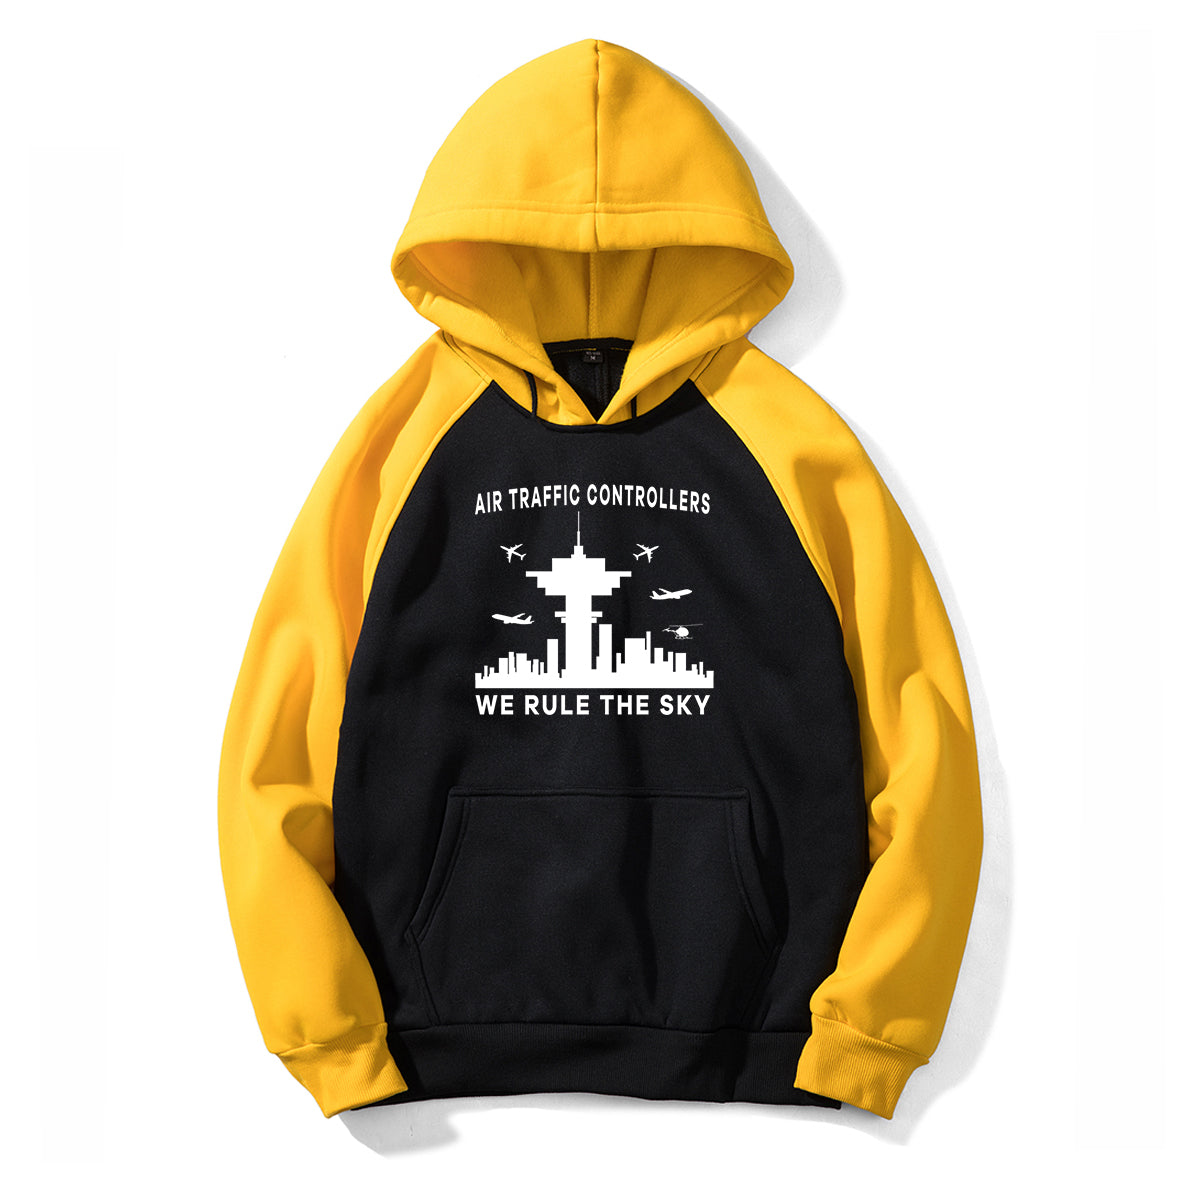 Air Traffic Controllers - We Rule The Sky Designed Colourful Hoodies